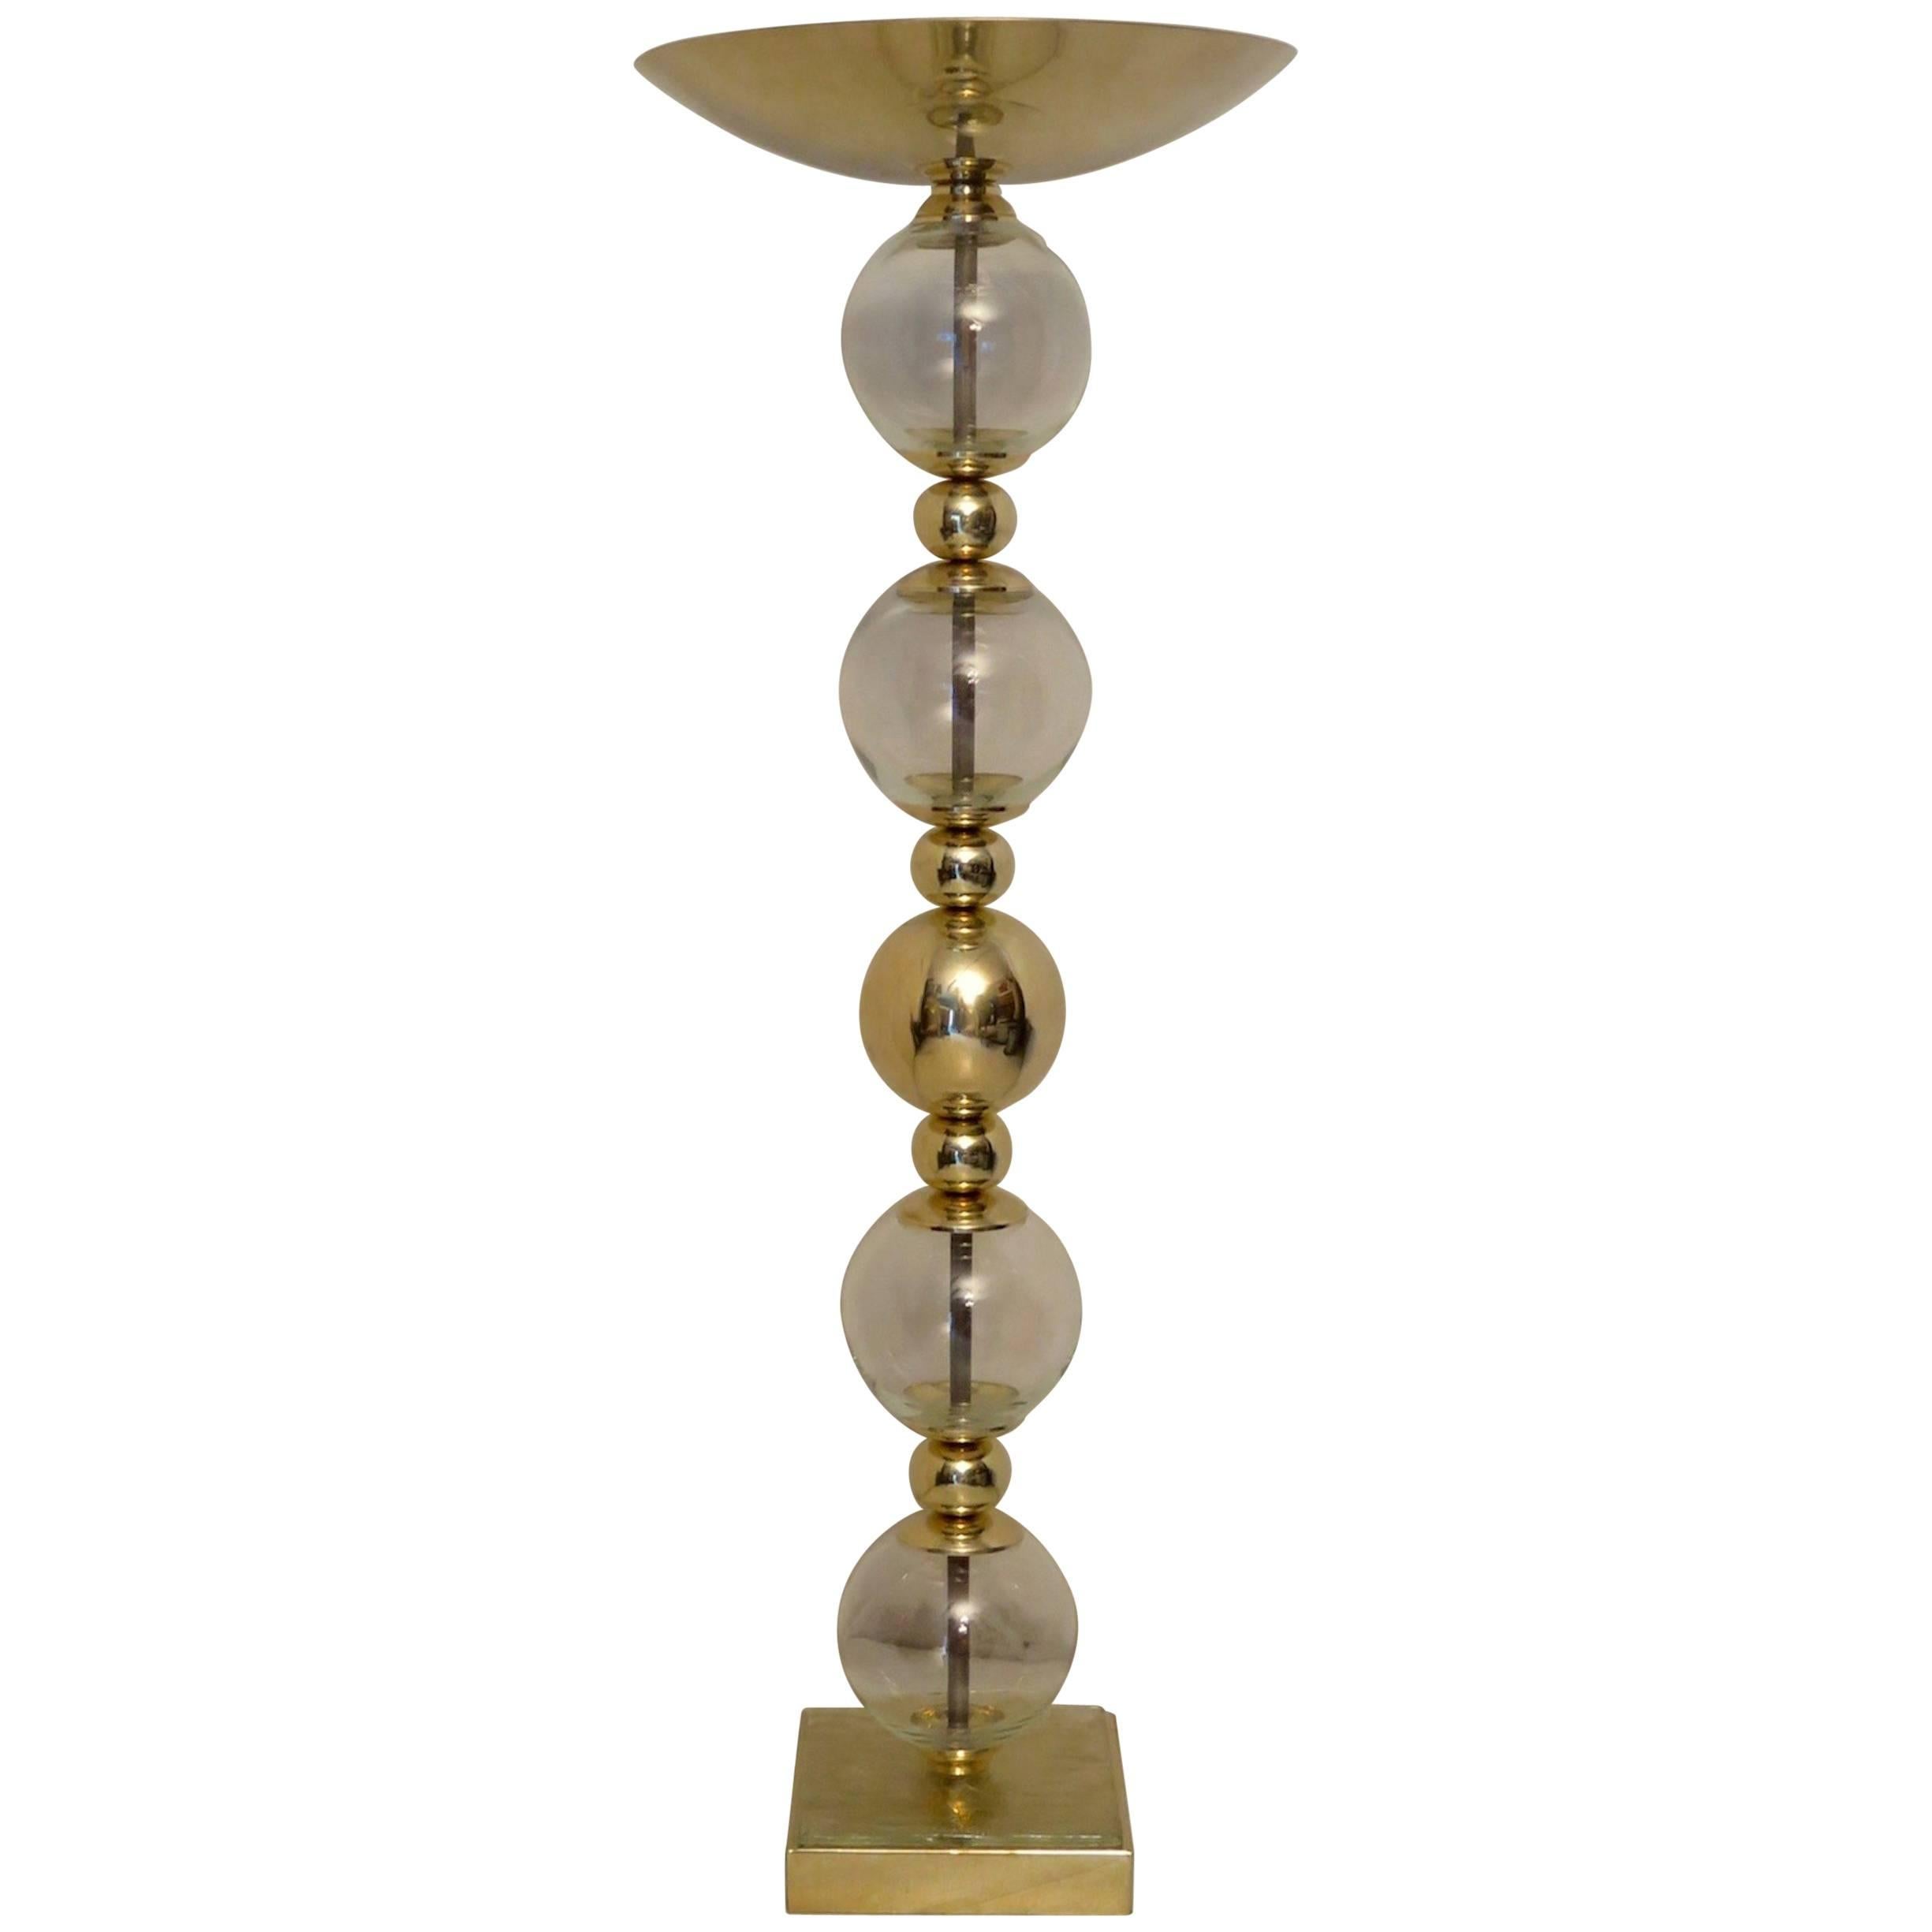 Murano floor lamp from the 1980s, all in Murano Art glass and brass.

It is composed of transparent Art glass spheres and brass spheres, which alternate with one another. The glass ones are four large transparent spheres, of a beautiful glass that